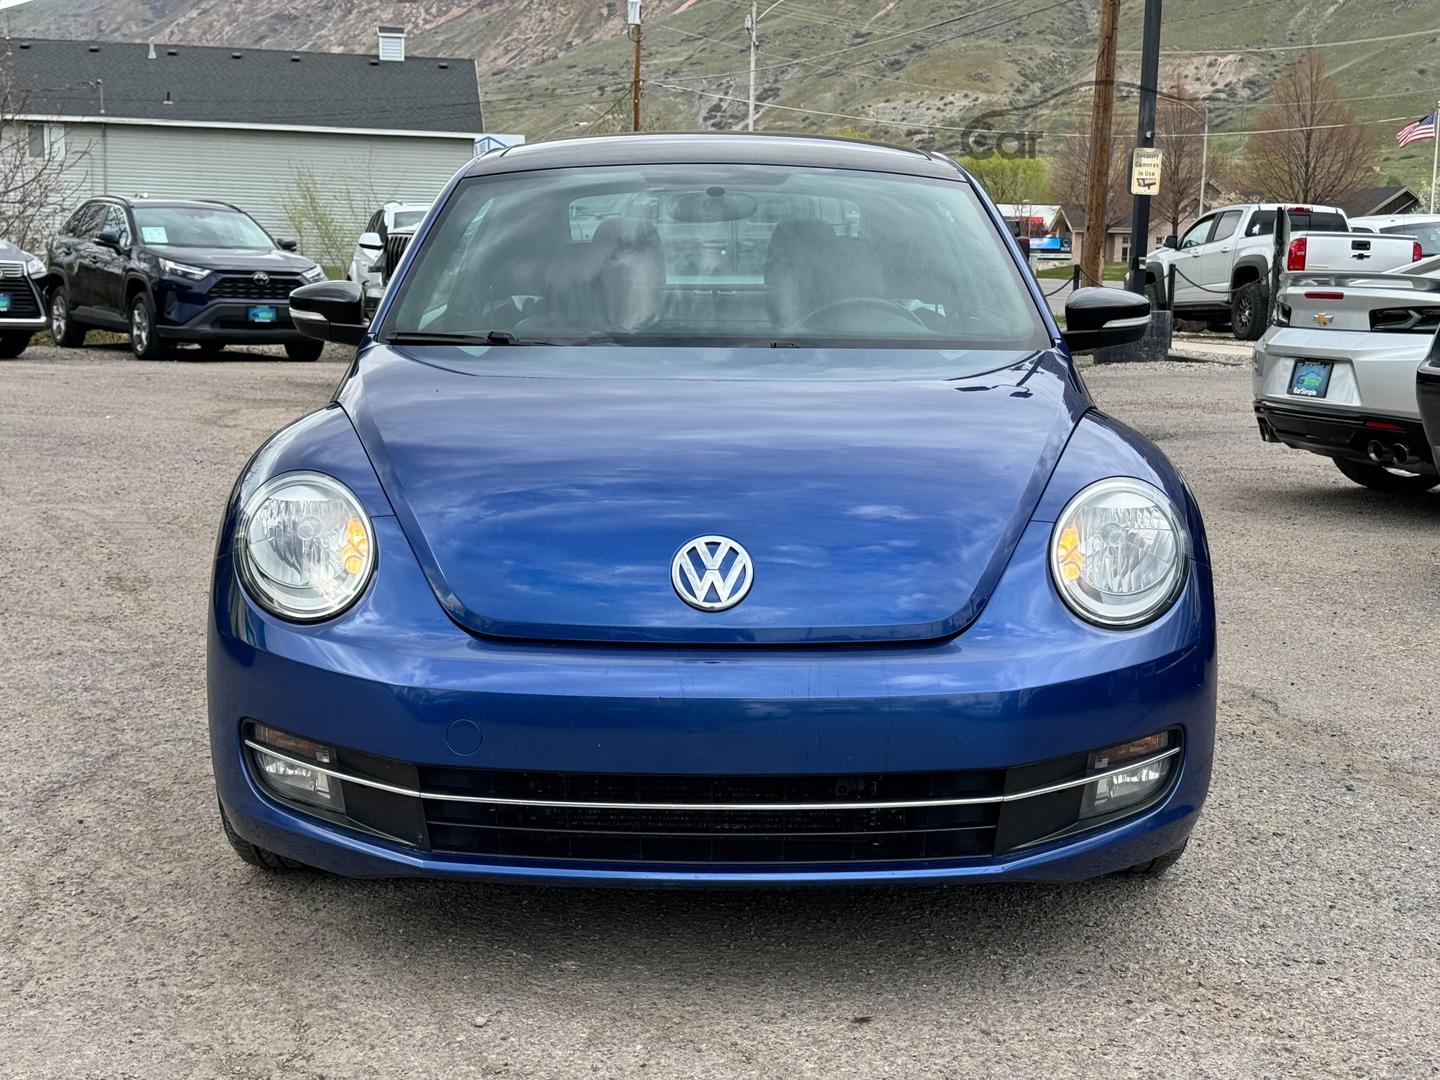 Used 2012 Volkswagen Beetle 2.0 with VIN 3VW4A7AT8CM659233 for sale in Springville, UT